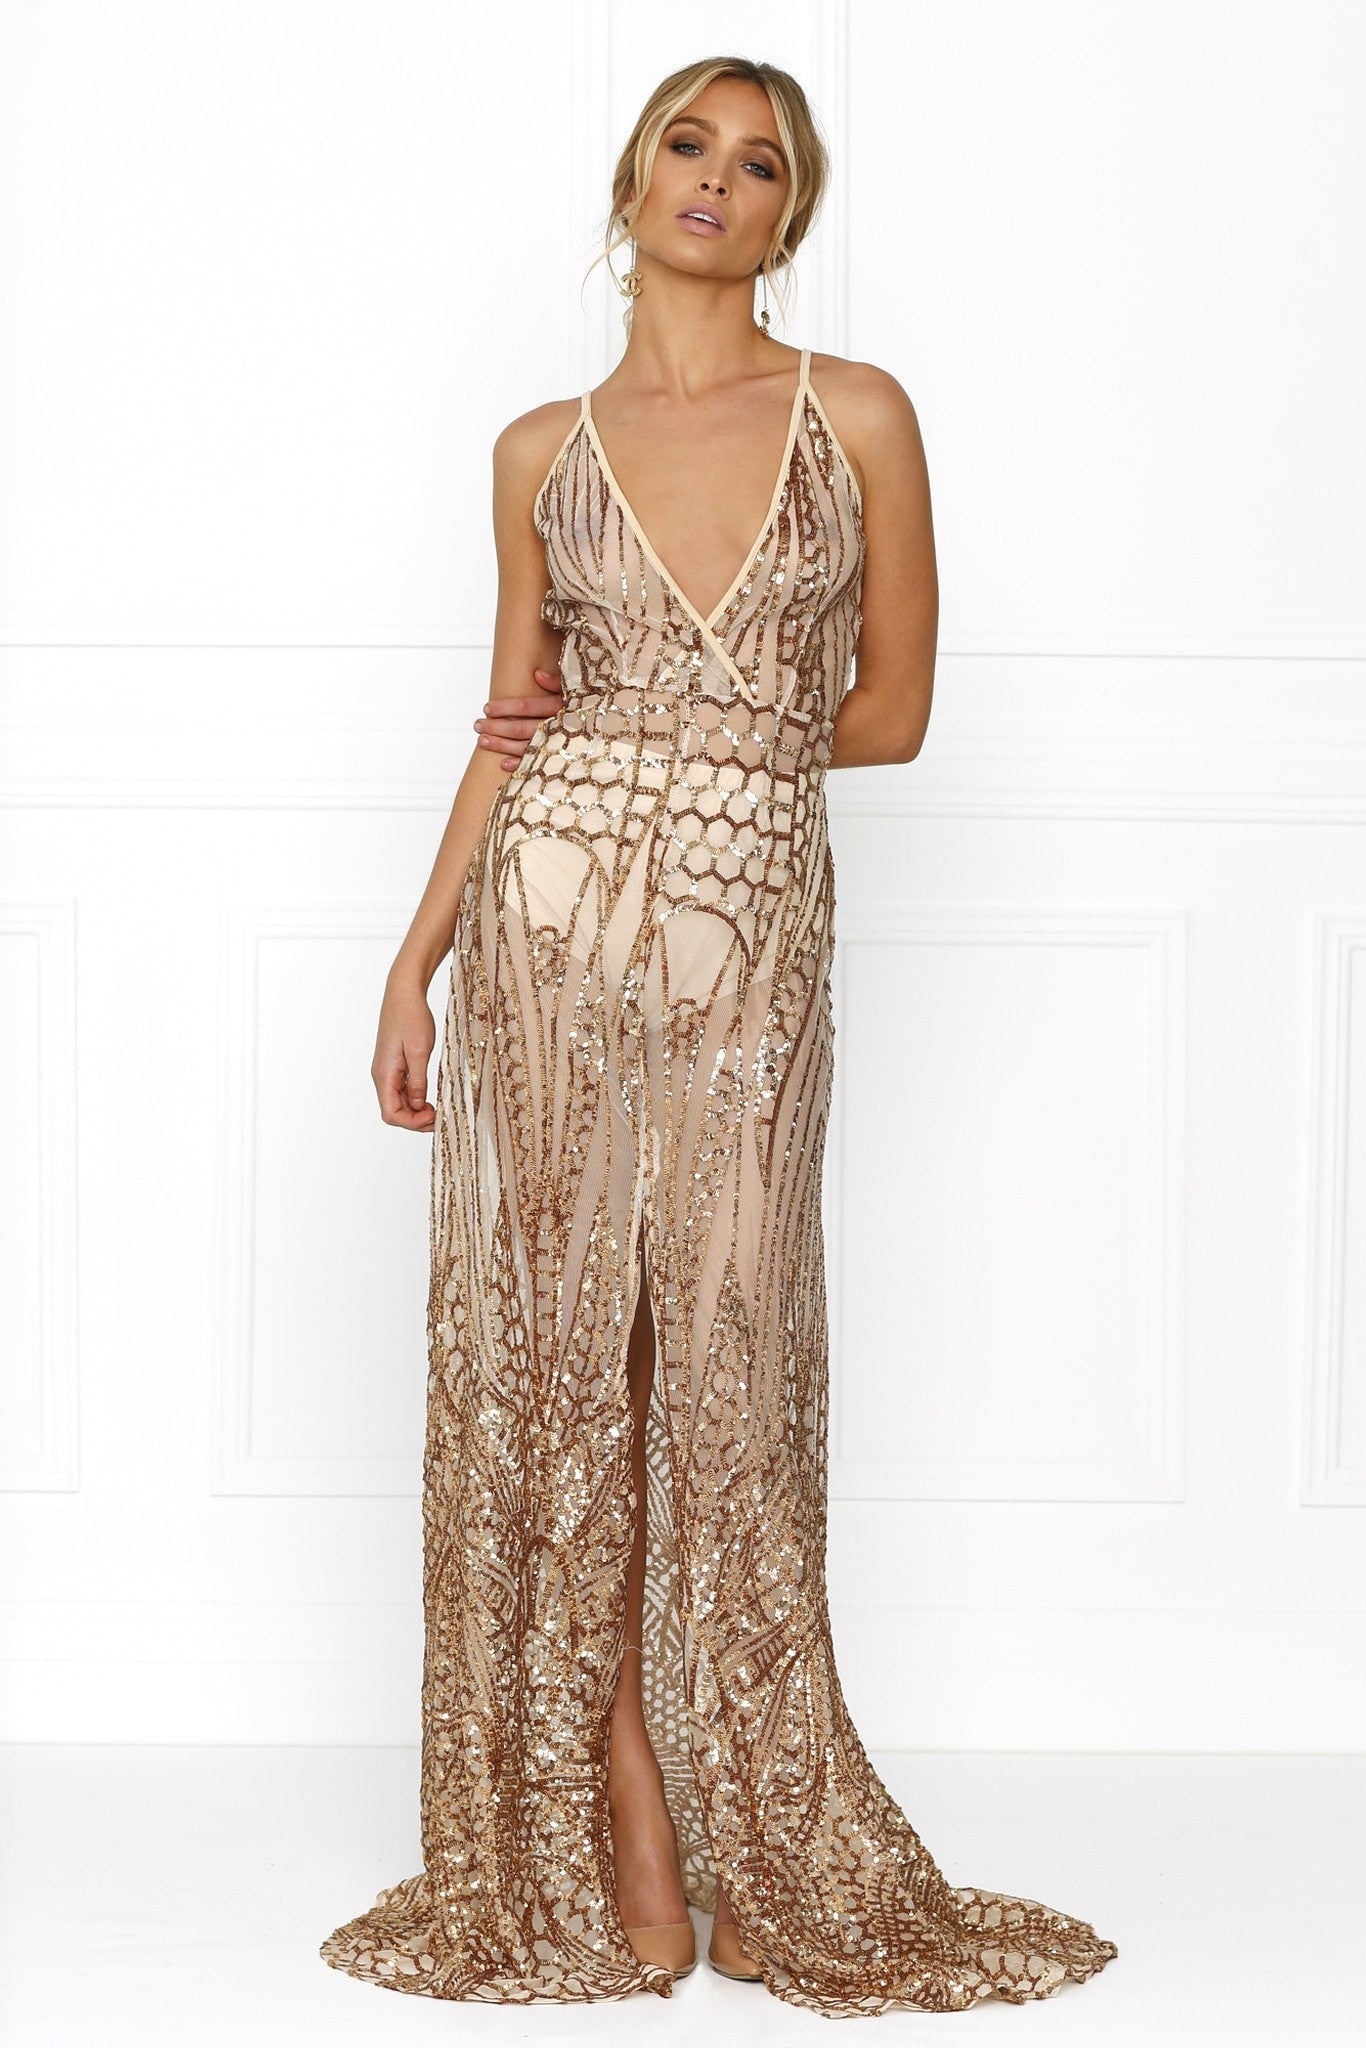 Honey Couture SIENA Rose Gold Sheer Sequin w Split Evening Gown Dress Honey Couture$ AfterPay Humm ZipPay LayBuy Sezzle